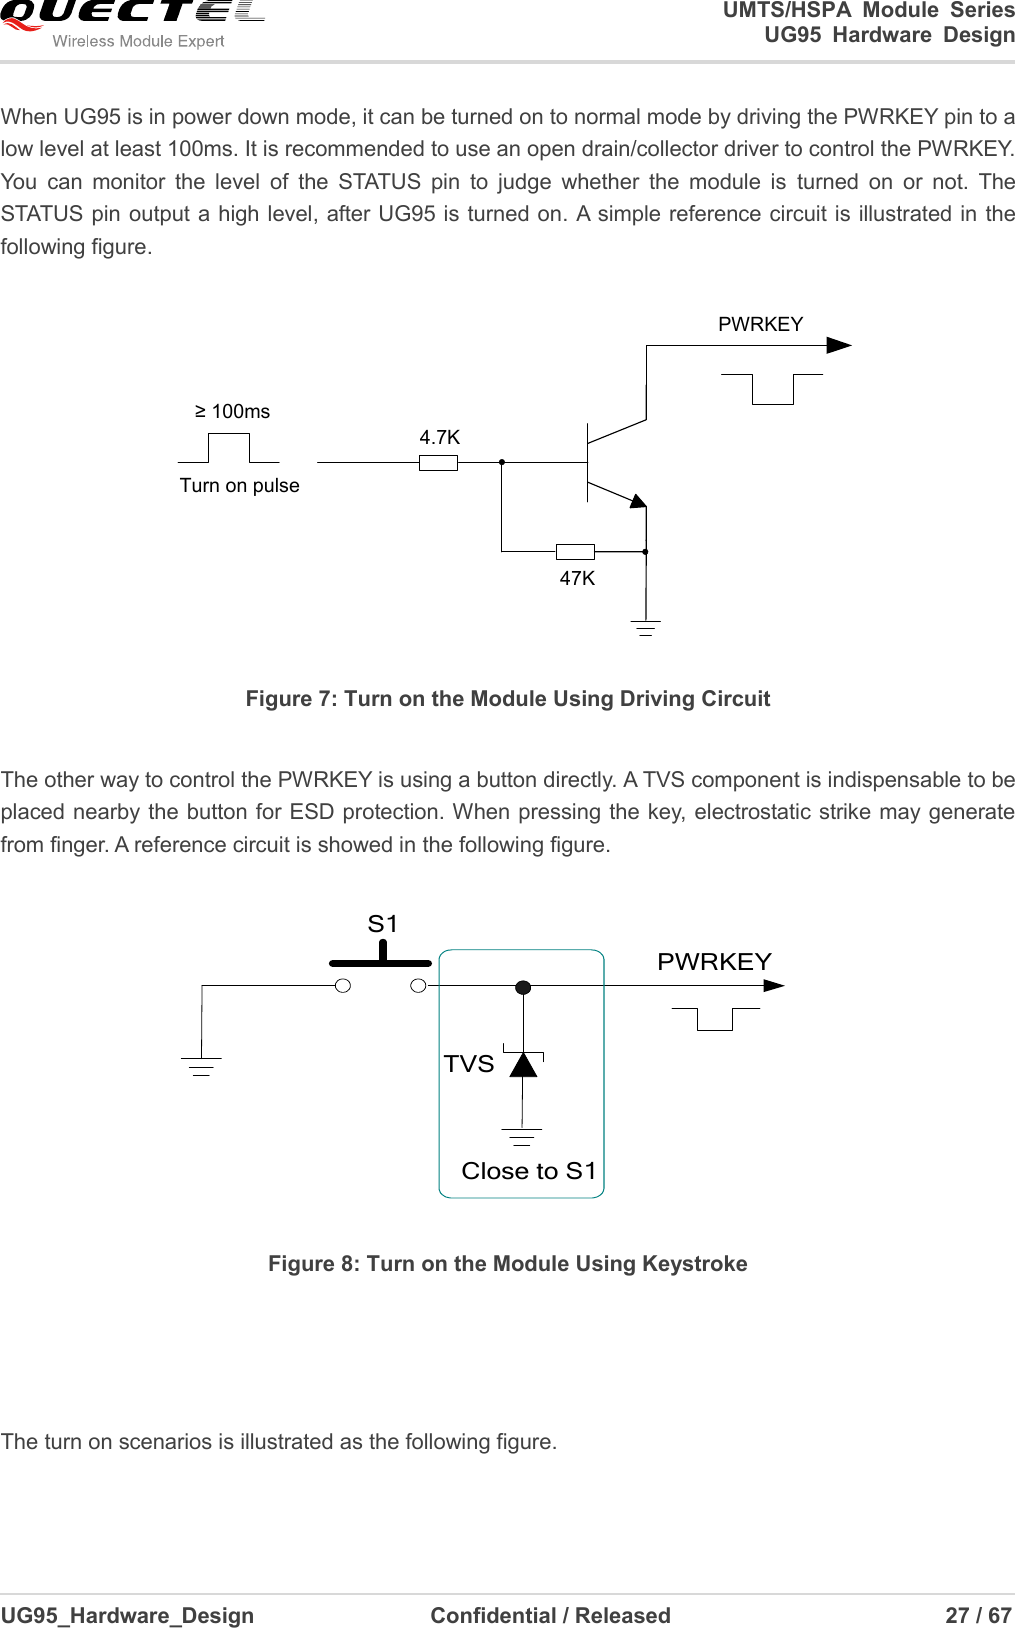                                                                                                                                               UMTS/HSPA  Module  Series                                                                 UG95  Hardware  Design  UG95_Hardware_Design                  Confidential / Released                             27 / 67    When UG95 is in power down mode, it can be turned on to normal mode by driving the PWRKEY pin to a low level at least 100ms. It is recommended to use an open drain/collector driver to control the PWRKEY. You  can  monitor  the  level  of  the  STATUS  pin  to  judge  whether  the  module  is  turned  on  or  not.  The STATUS pin output a high level, after UG95 is turned on. A simple reference circuit is illustrated in the following figure.  Turn on pulsePWRKEY4.7K47K≥ 100ms Figure 7: Turn on the Module Using Driving Circuit  The other way to control the PWRKEY is using a button directly. A TVS component is indispensable to be placed nearby the button for ESD protection. When pressing the key, electrostatic strike may generate from finger. A reference circuit is showed in the following figure.  PWRKEYS1Close to S1TVS Figure 8: Turn on the Module Using Keystroke     The turn on scenarios is illustrated as the following figure.  